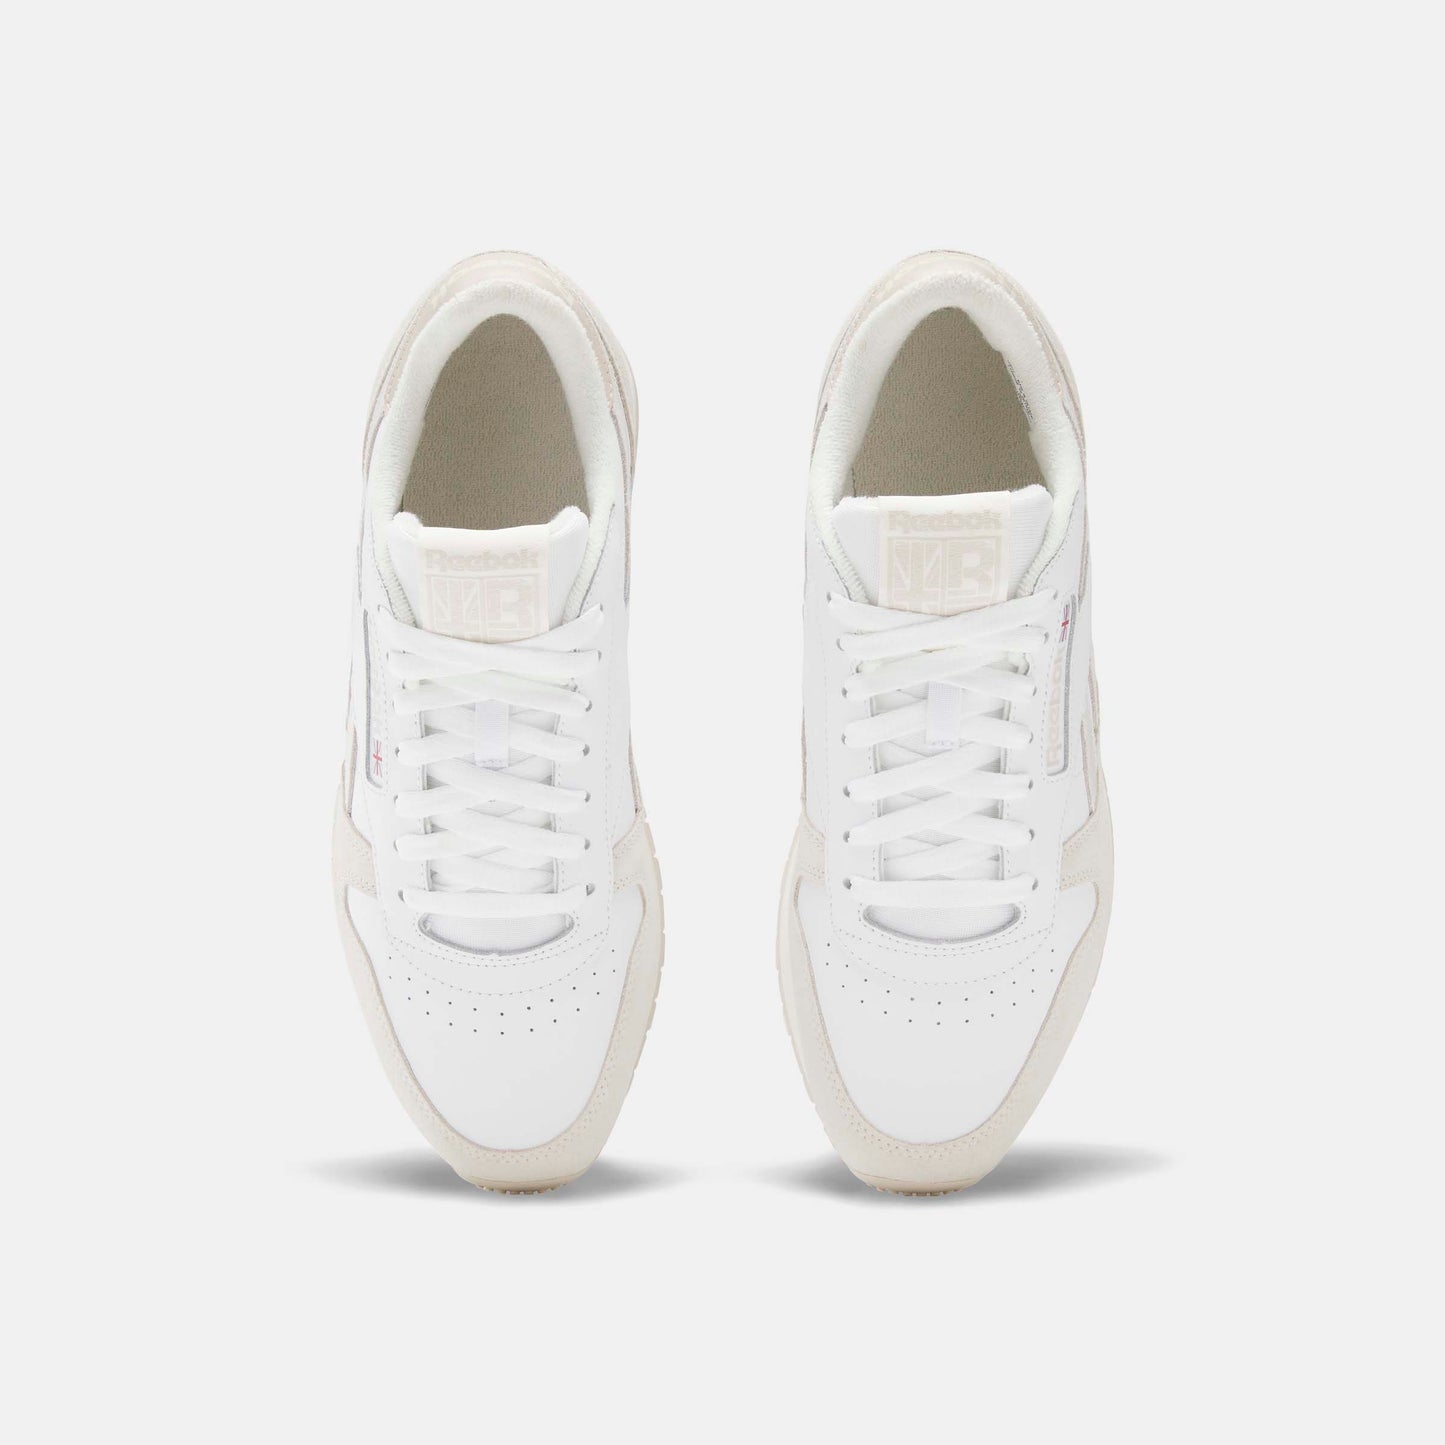 Classic Leather Shoes White/Chalk/Stucco